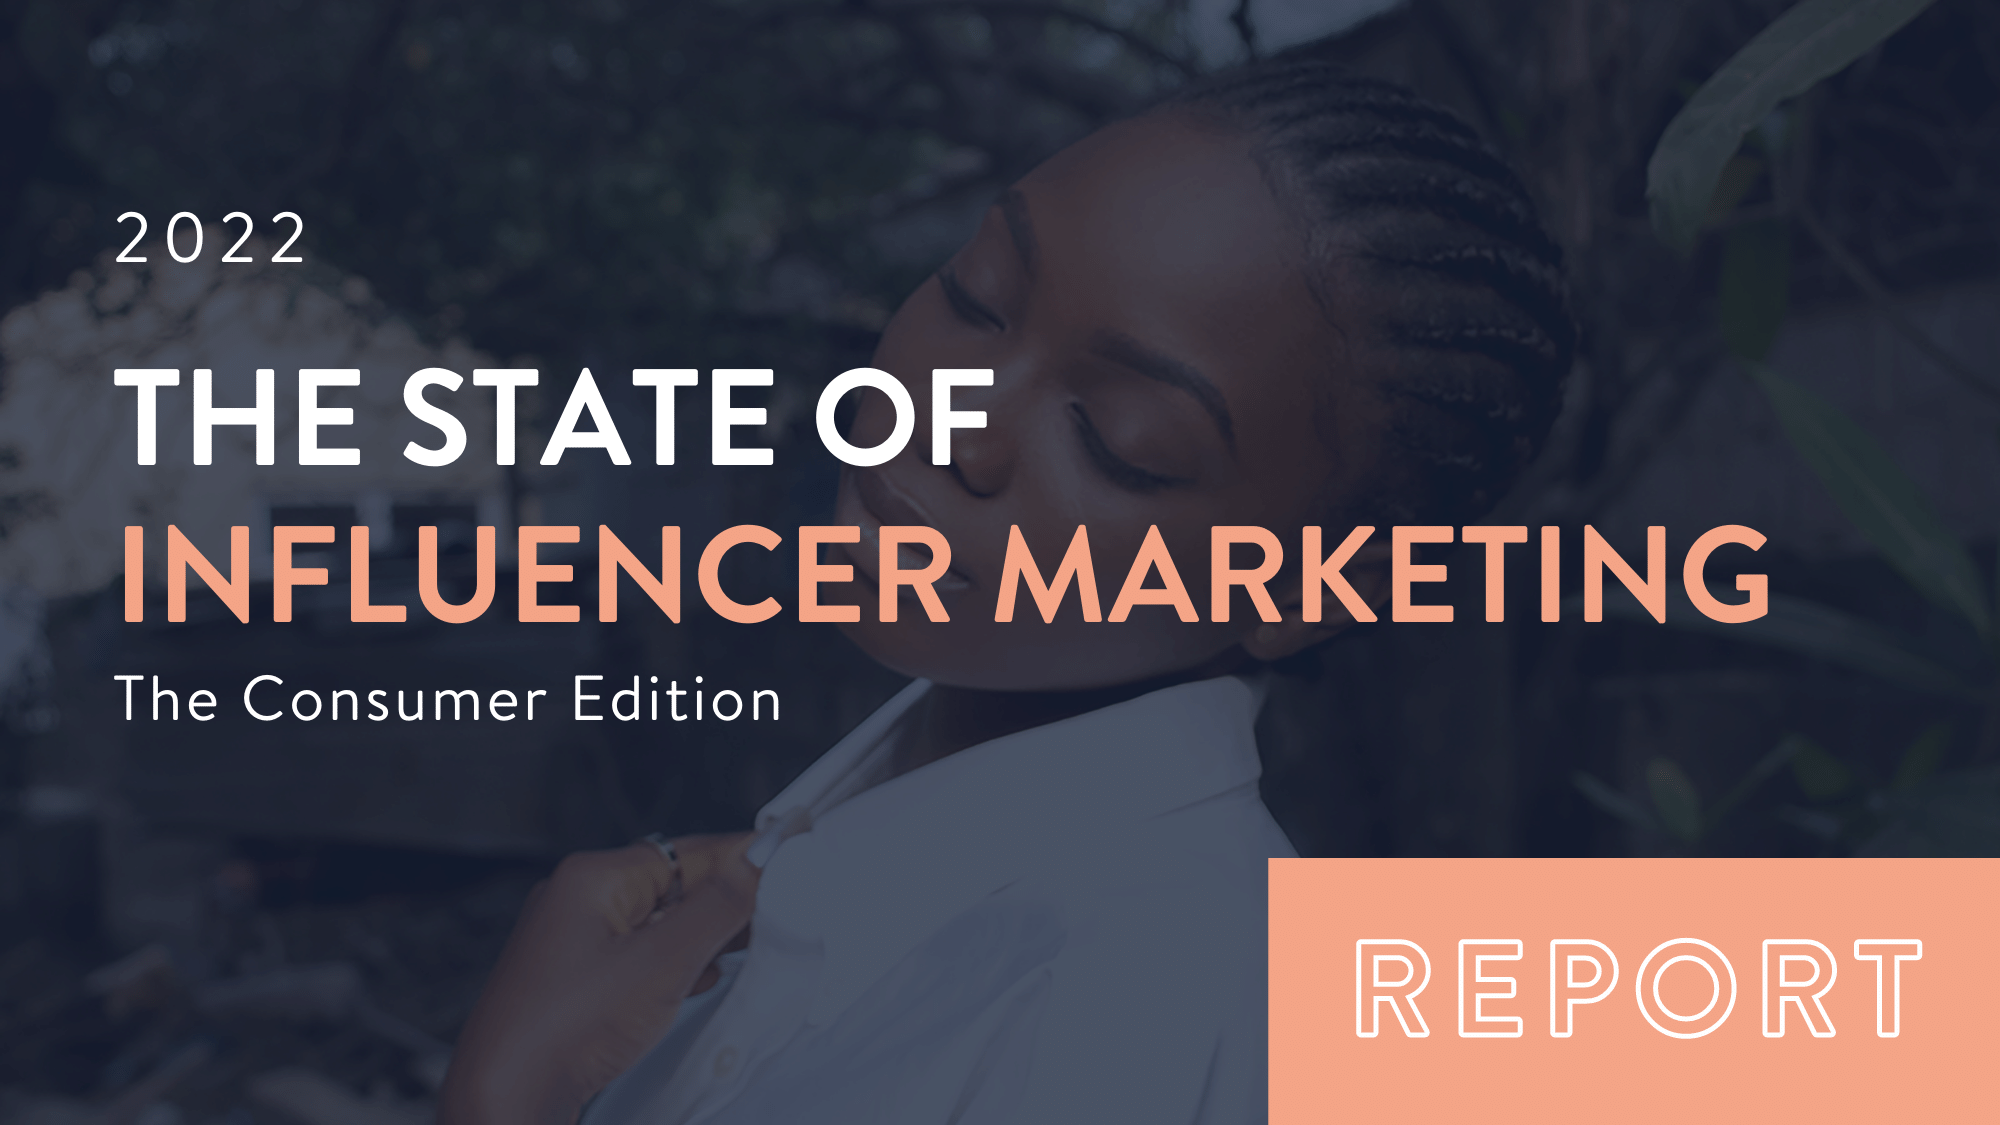 The State of Influencer Marketing: Consumer Edition